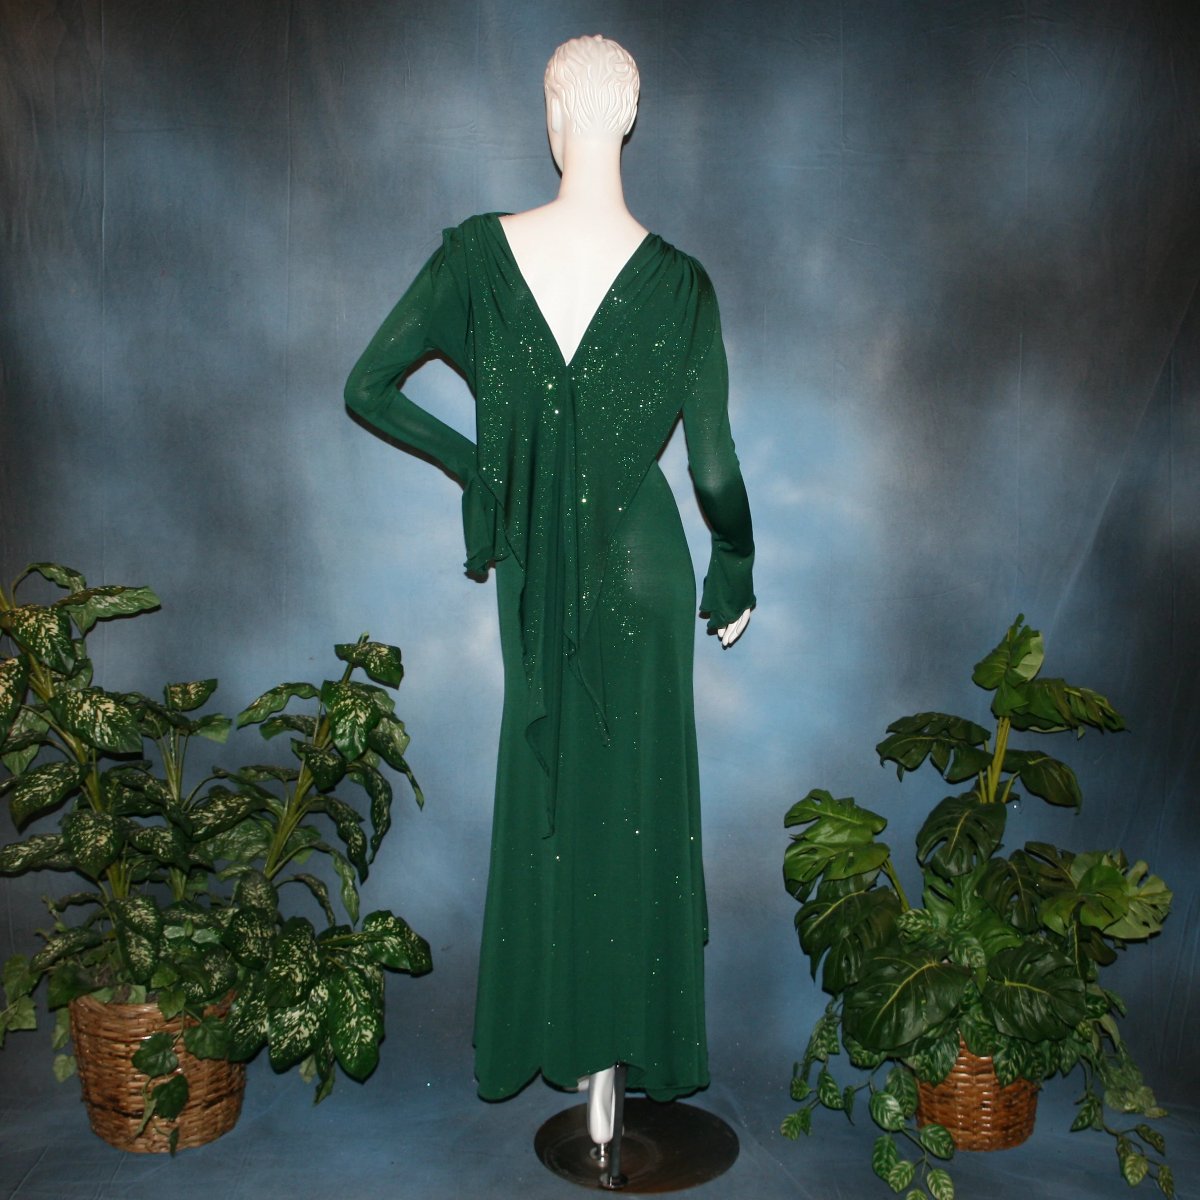 Crystal's Creations back view of Green social ballroom dress was created in luxurious deep emerald glitter slinky, with full  & flaring skirt bottom, long flair sleeves & draping trailing down the back makes this gorgeous dress very elegant & classy!